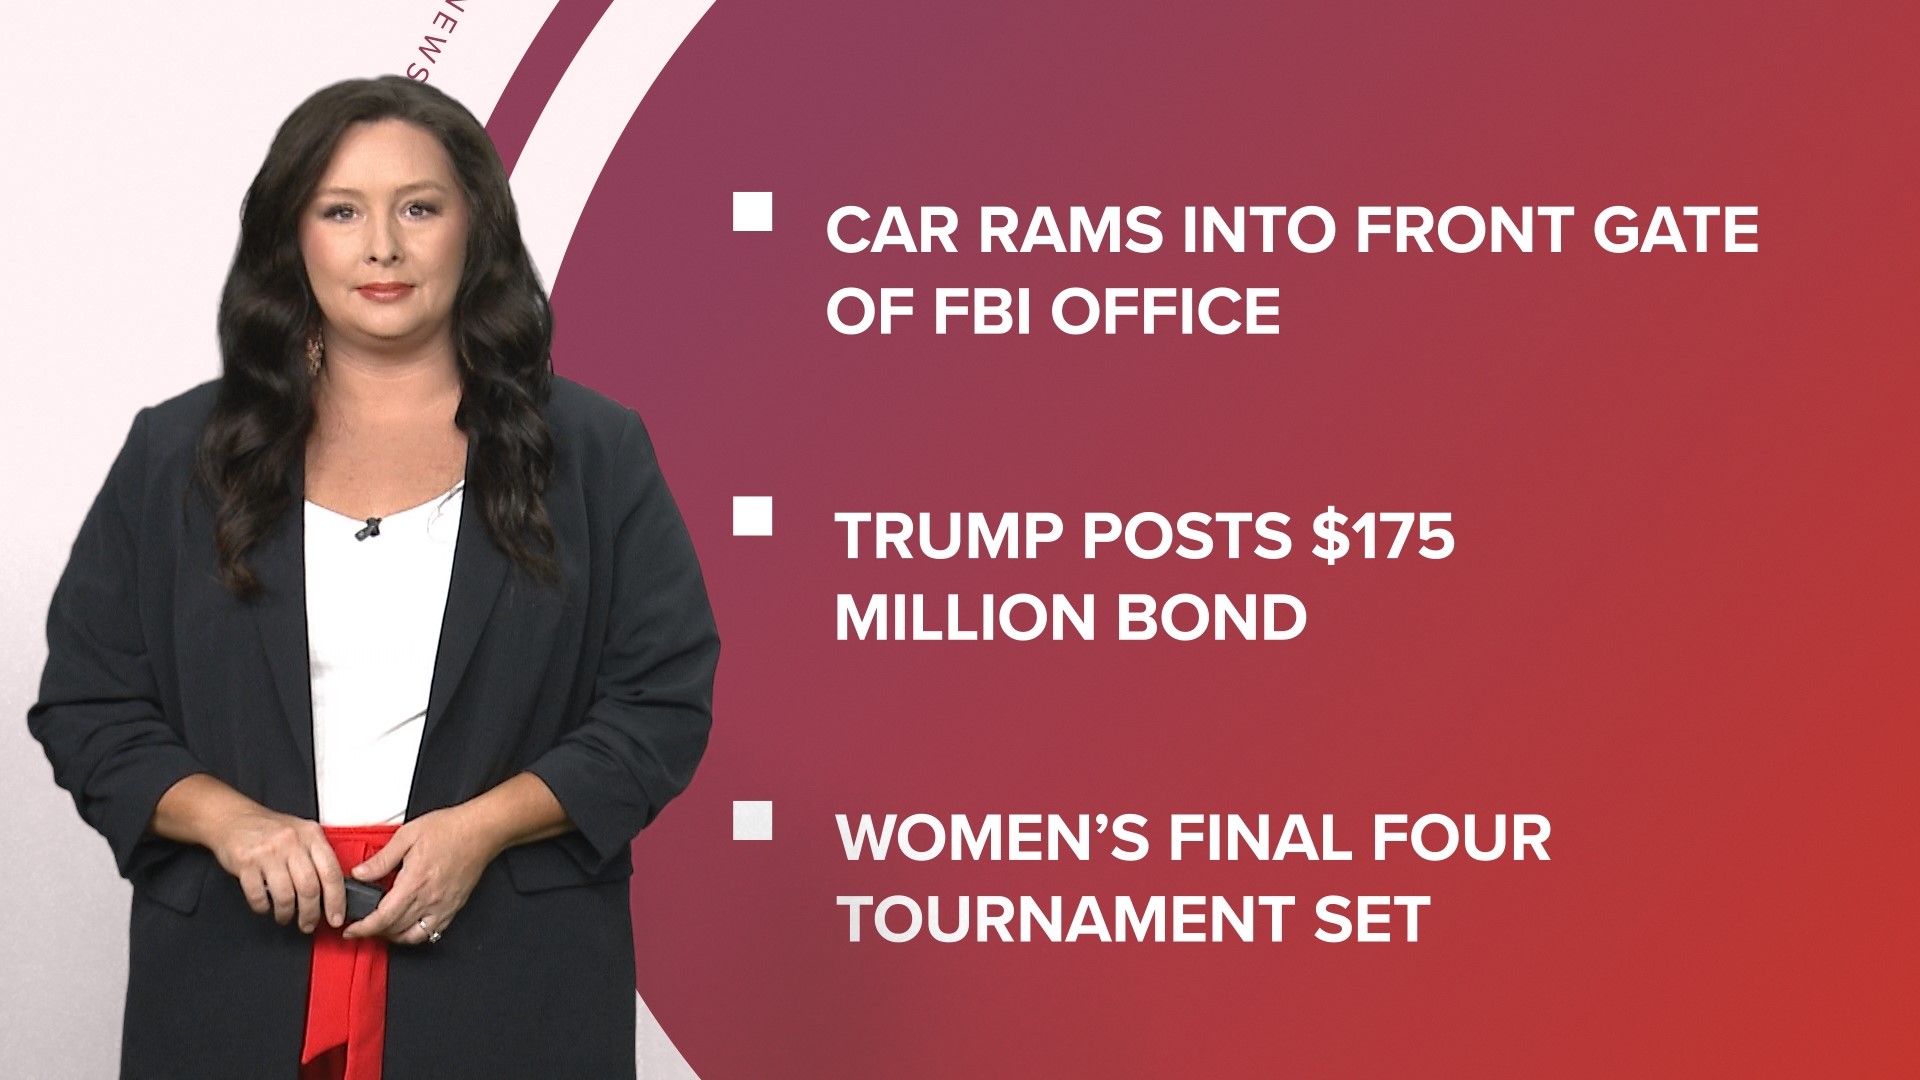 A look at what is happening in the news from an incident at a FBI office in Atlanta to Trump's legal woes and the field is set for Women's NCAA Final Four.